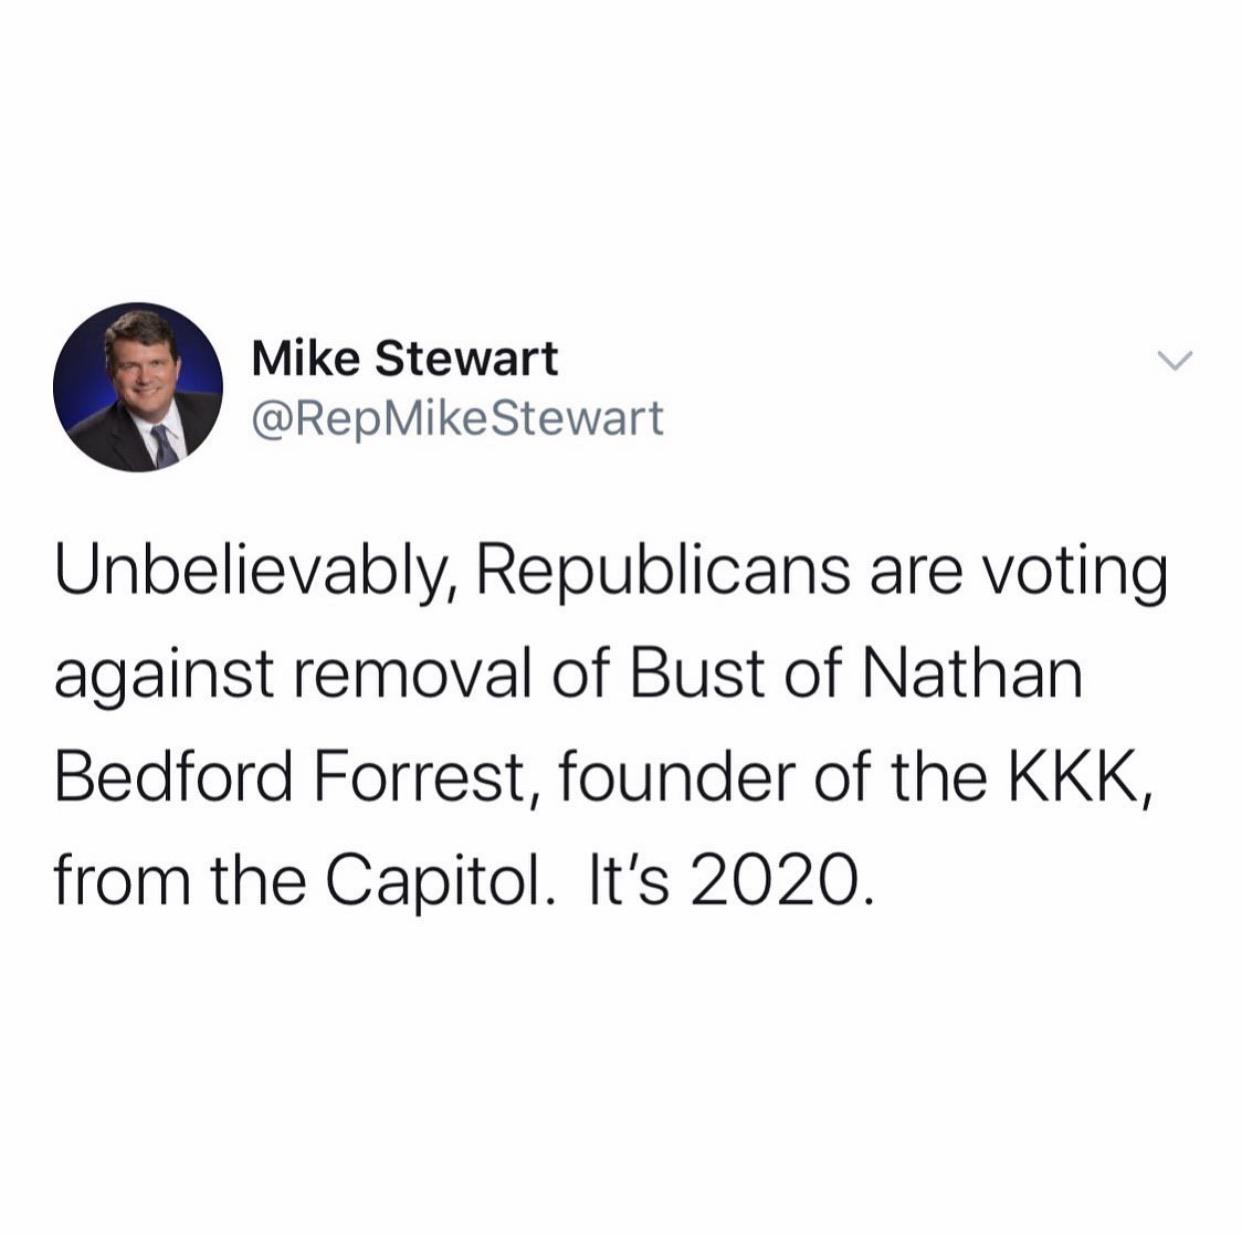 Political, KKK, Democrats, Truman, Lincoln, Union Political Memes Political, KKK, Democrats, Truman, Lincoln, Union text: Mike Stewart @RepMikeStewart Unbelievably, Republicans are voting against removal of Bust of Nathan Bedford Forrest, founder of the KKK, from the Capitol. It's 2020. 